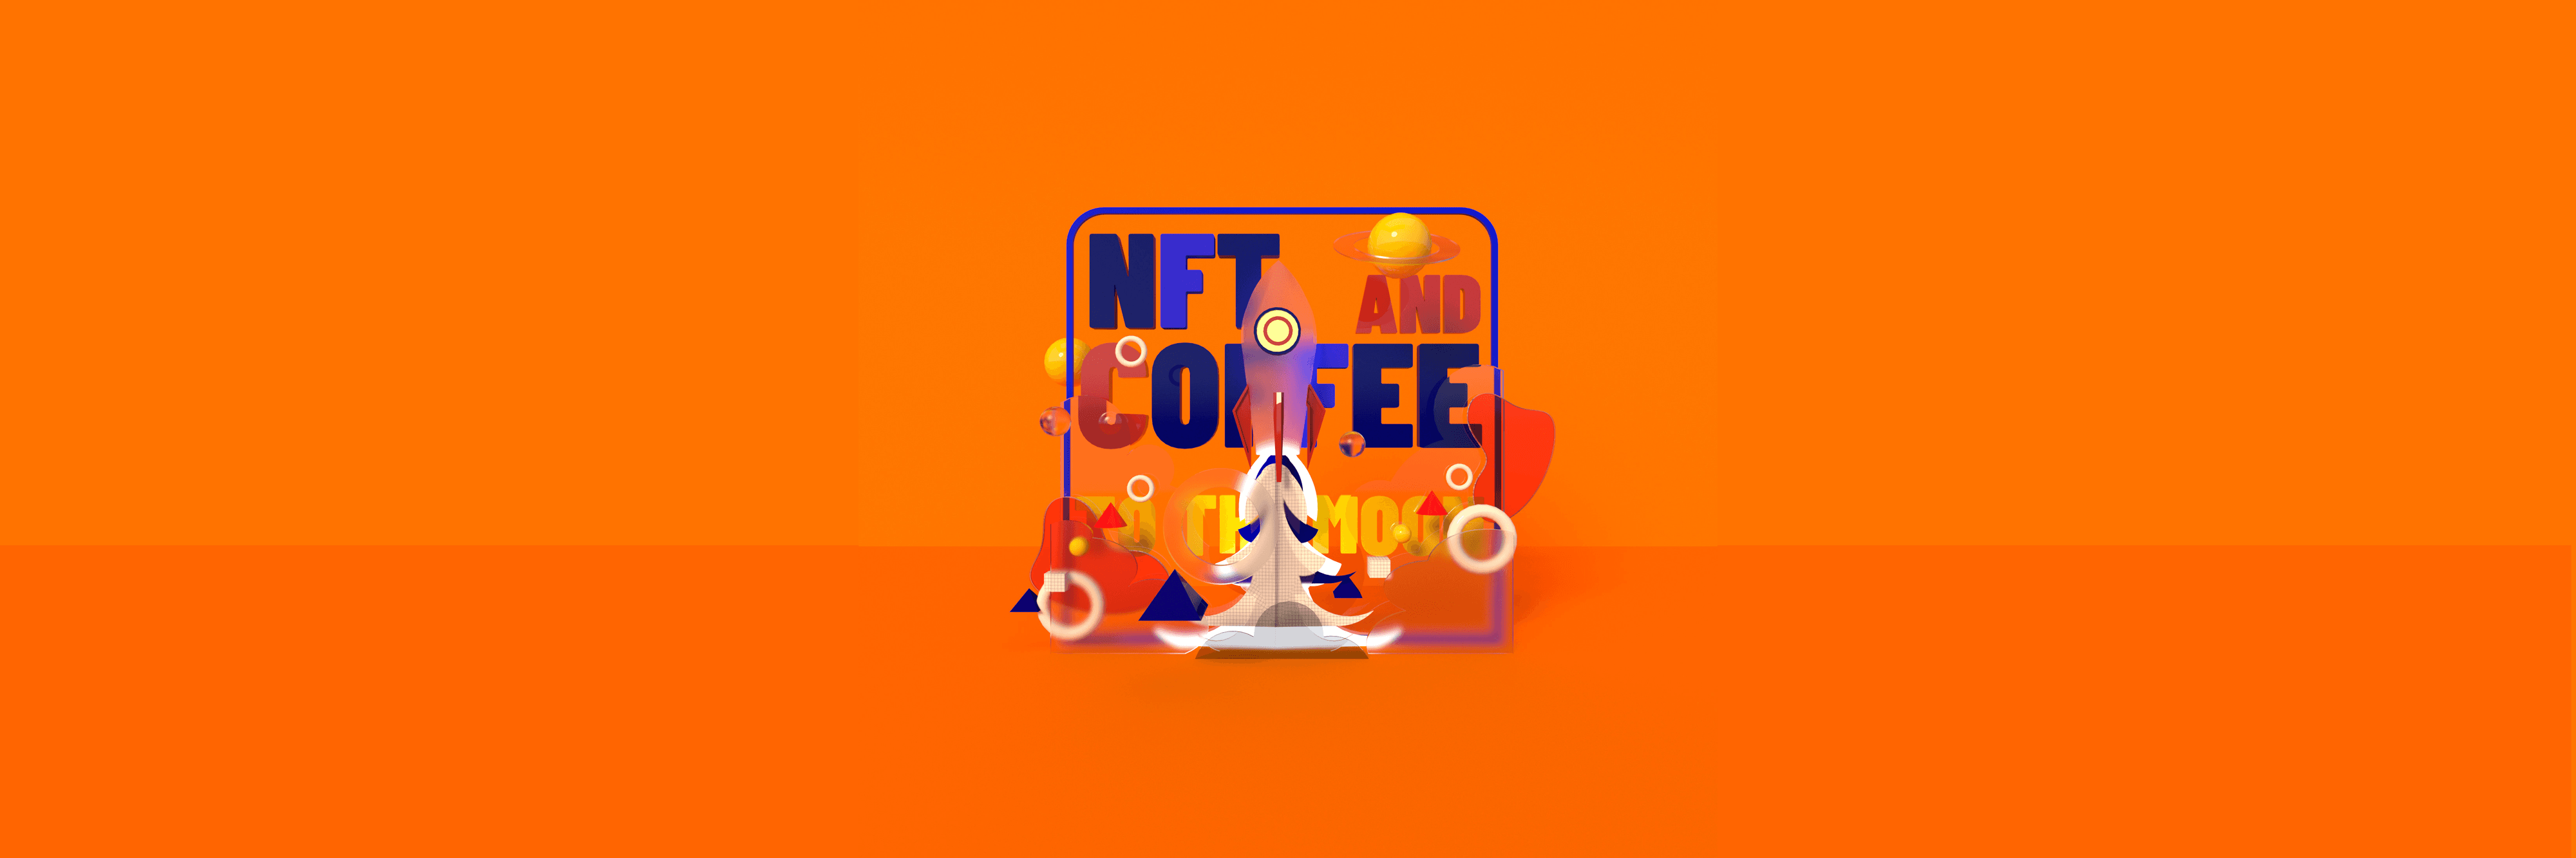 nft_and_coffee banner